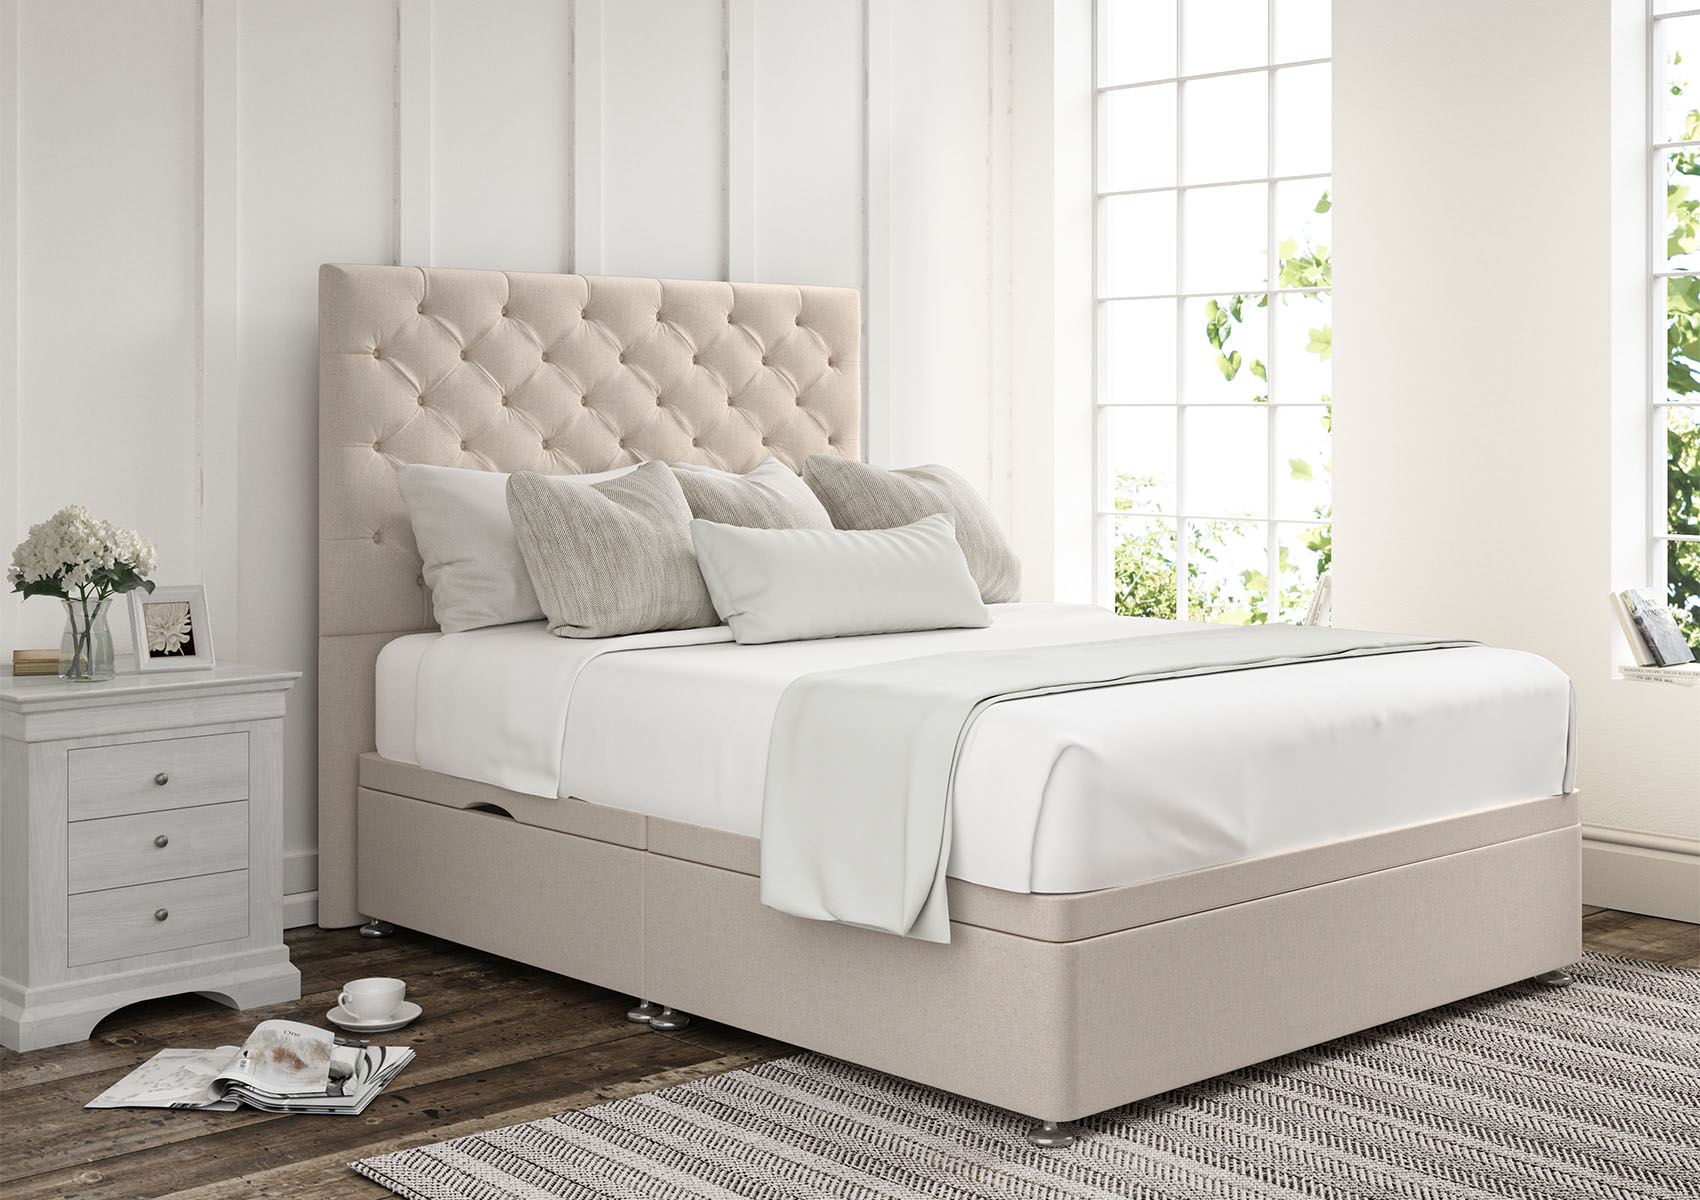 View Chesterfield Arlington Ice Upholstered Single Ottoman Bed Time4Sleep information